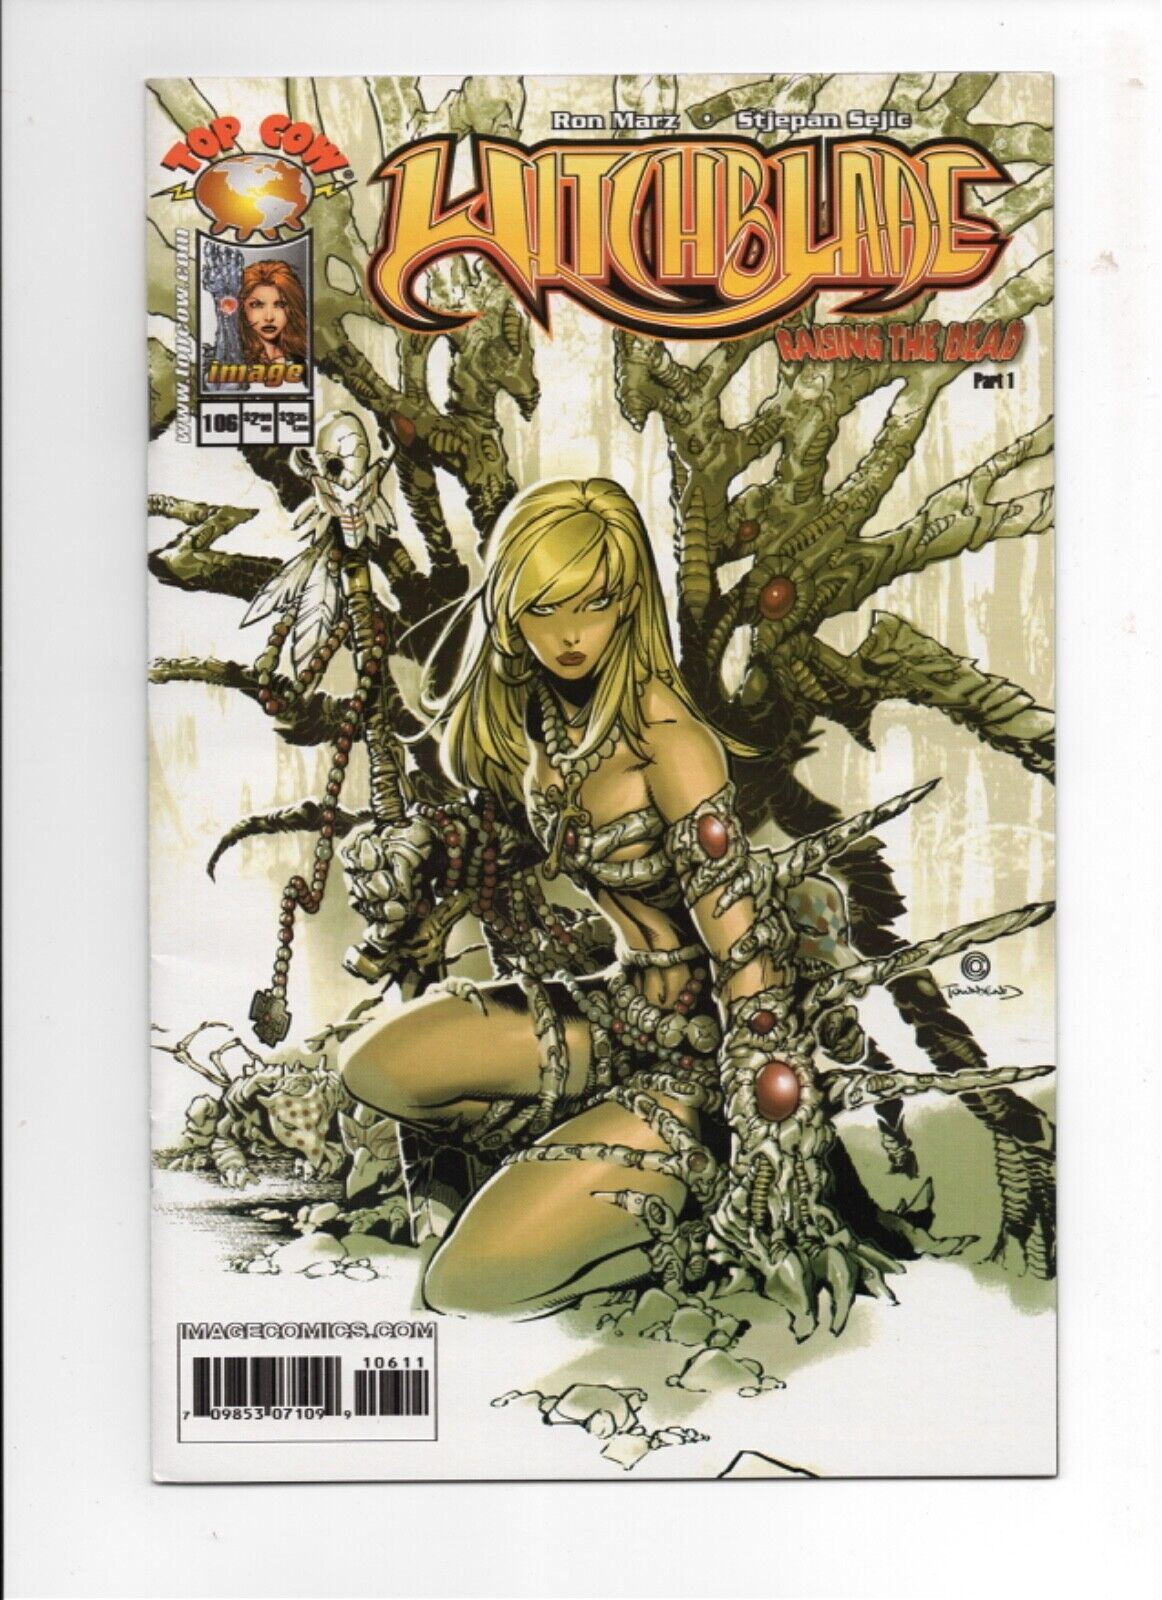 WITCHBLADE #106 Cover A by Chris Bachalo Image Comics 2007